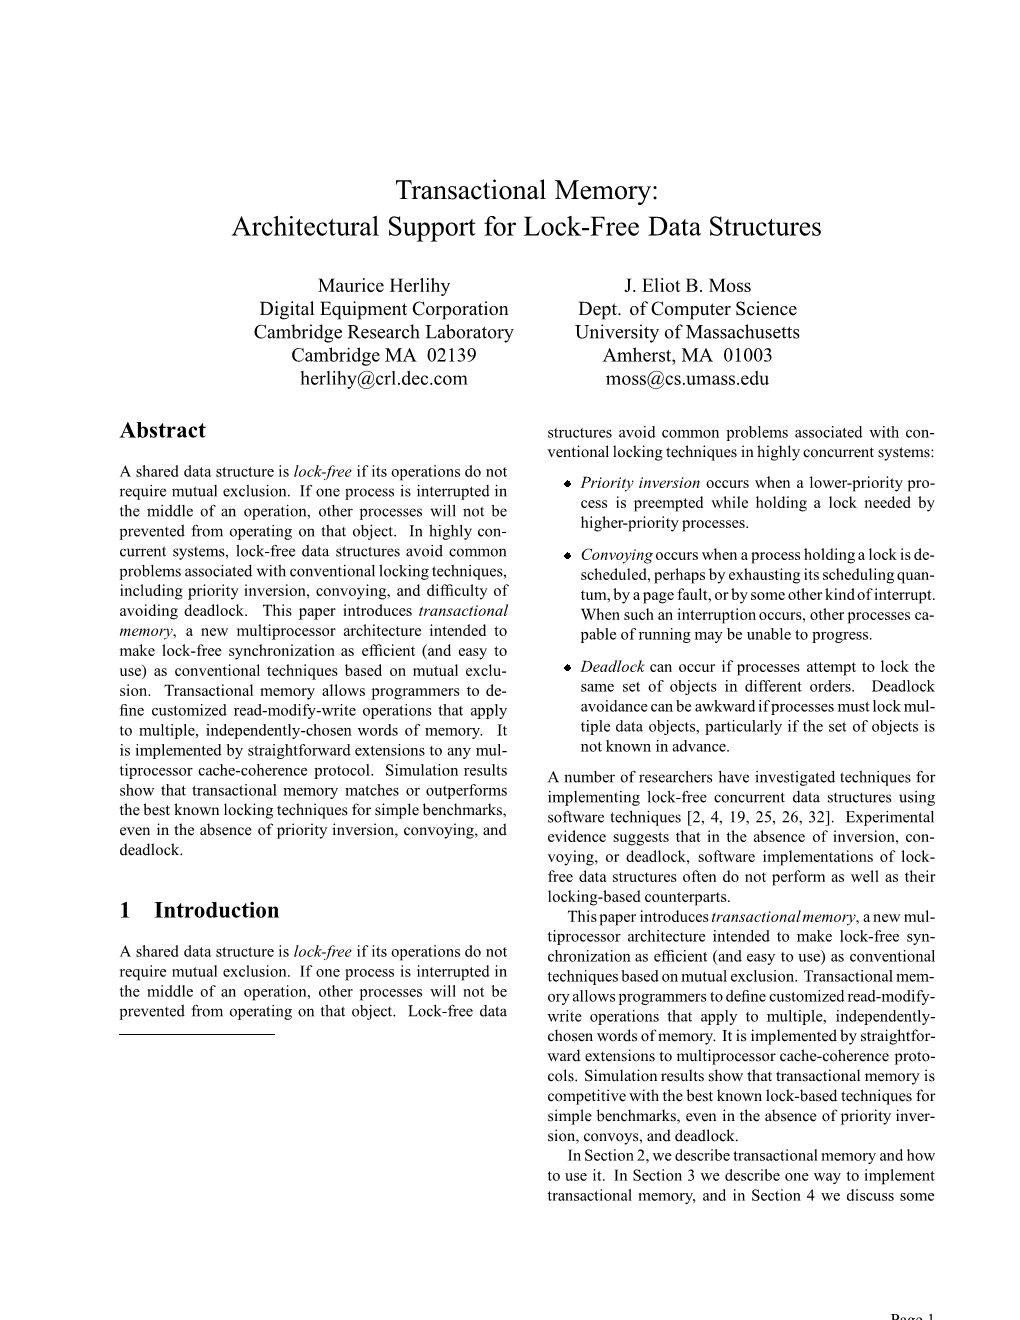 Transactional Memory: Architectural Support for Lock-Free Data Structures